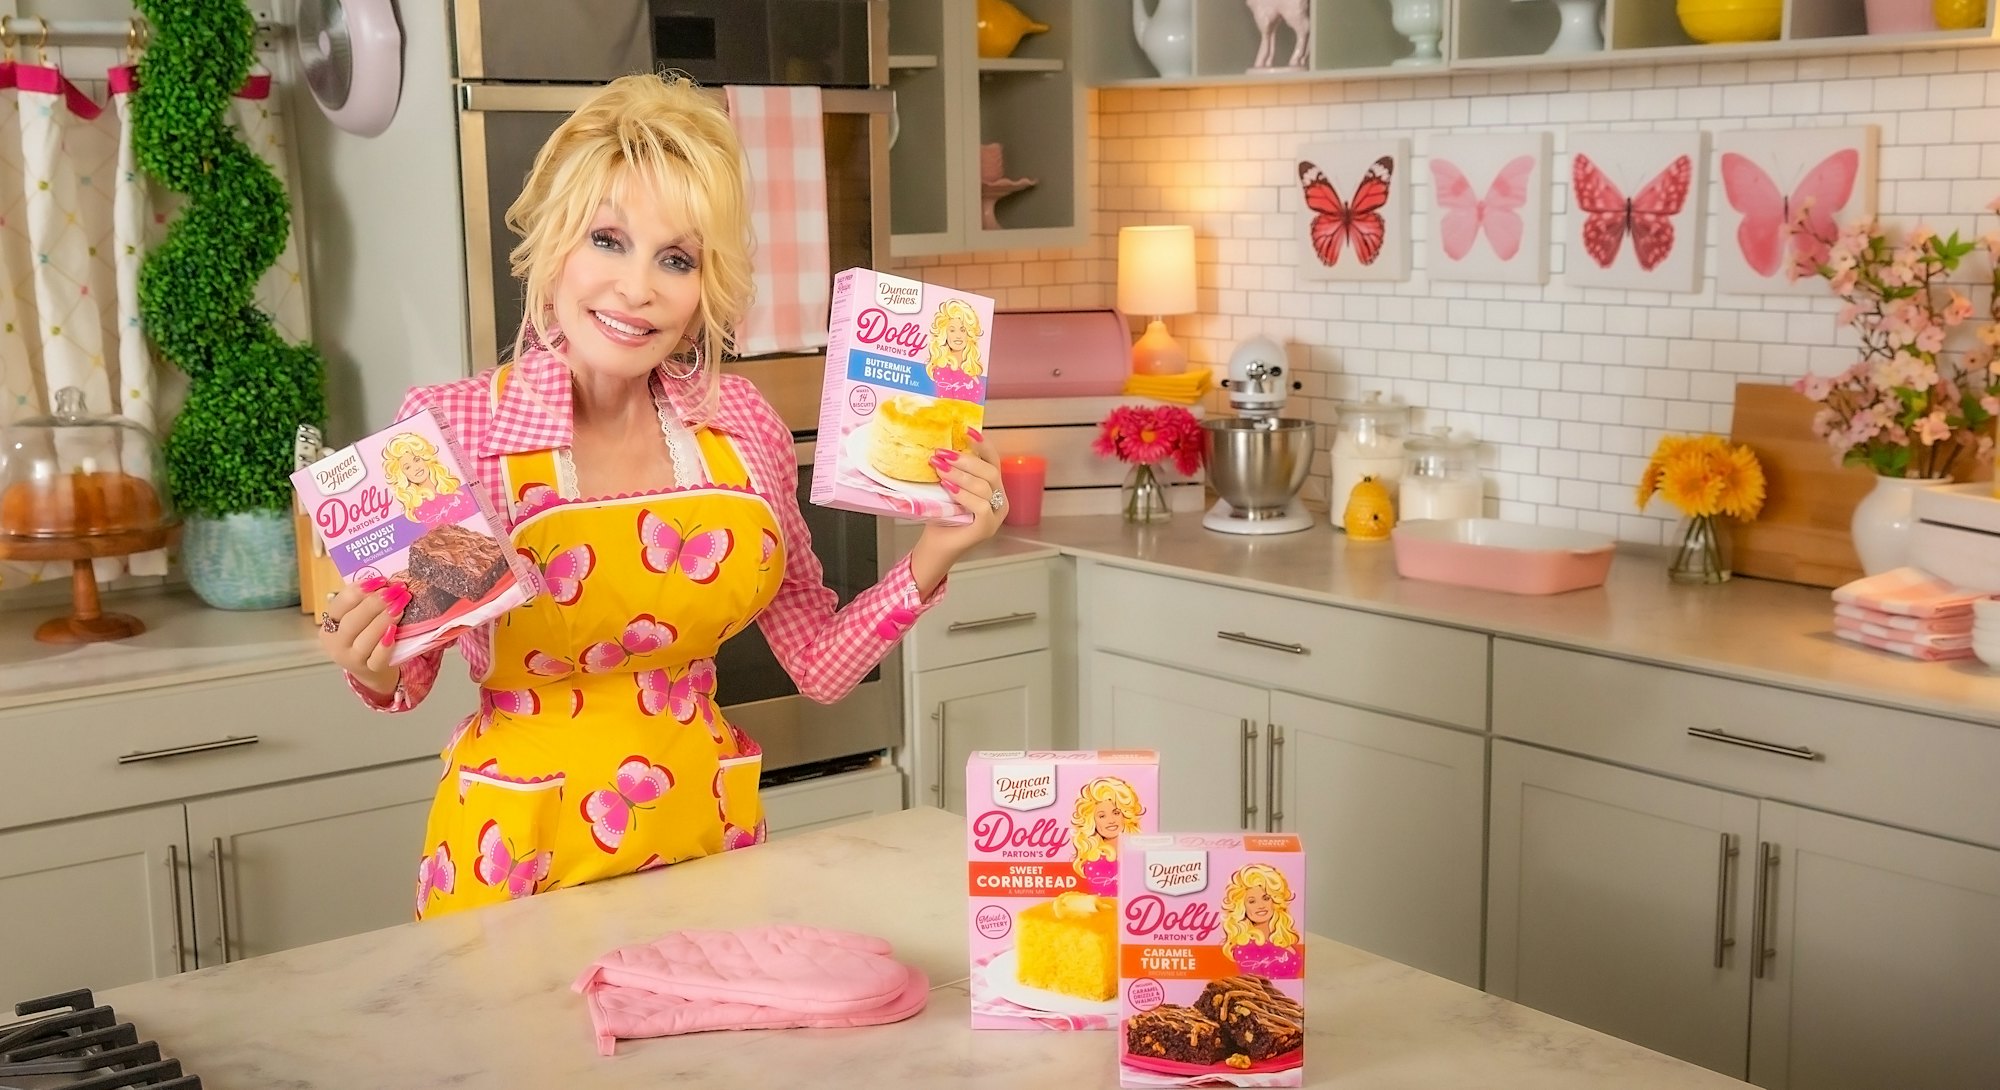 Dolly Parton released new baking mixes with Duncan Hines